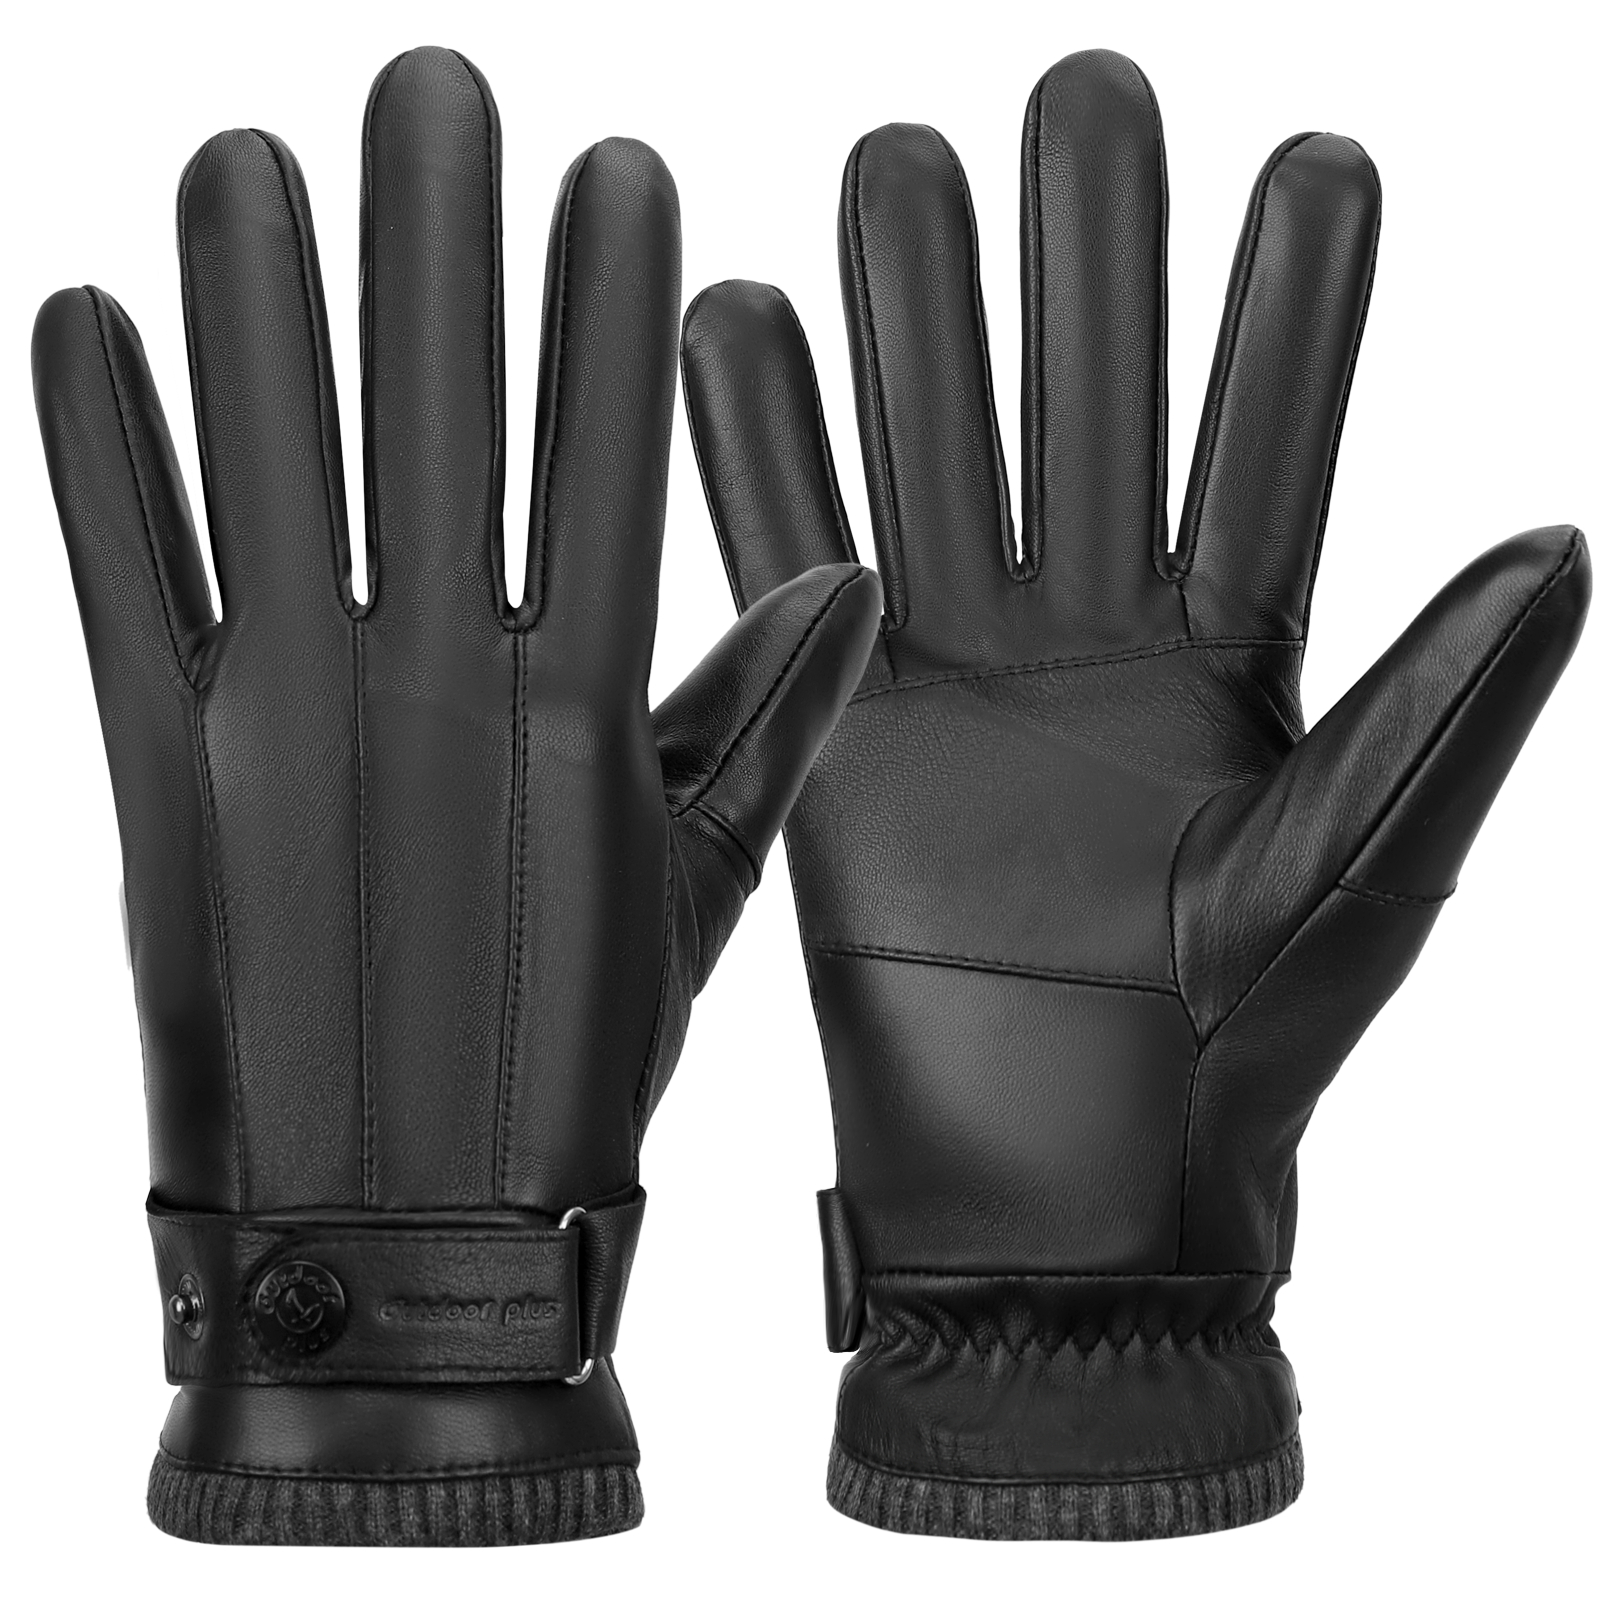 Leather Gloves for Men,Mens Winter Leather Driving Gloves Touchscreen for Gift - image 1 of 10